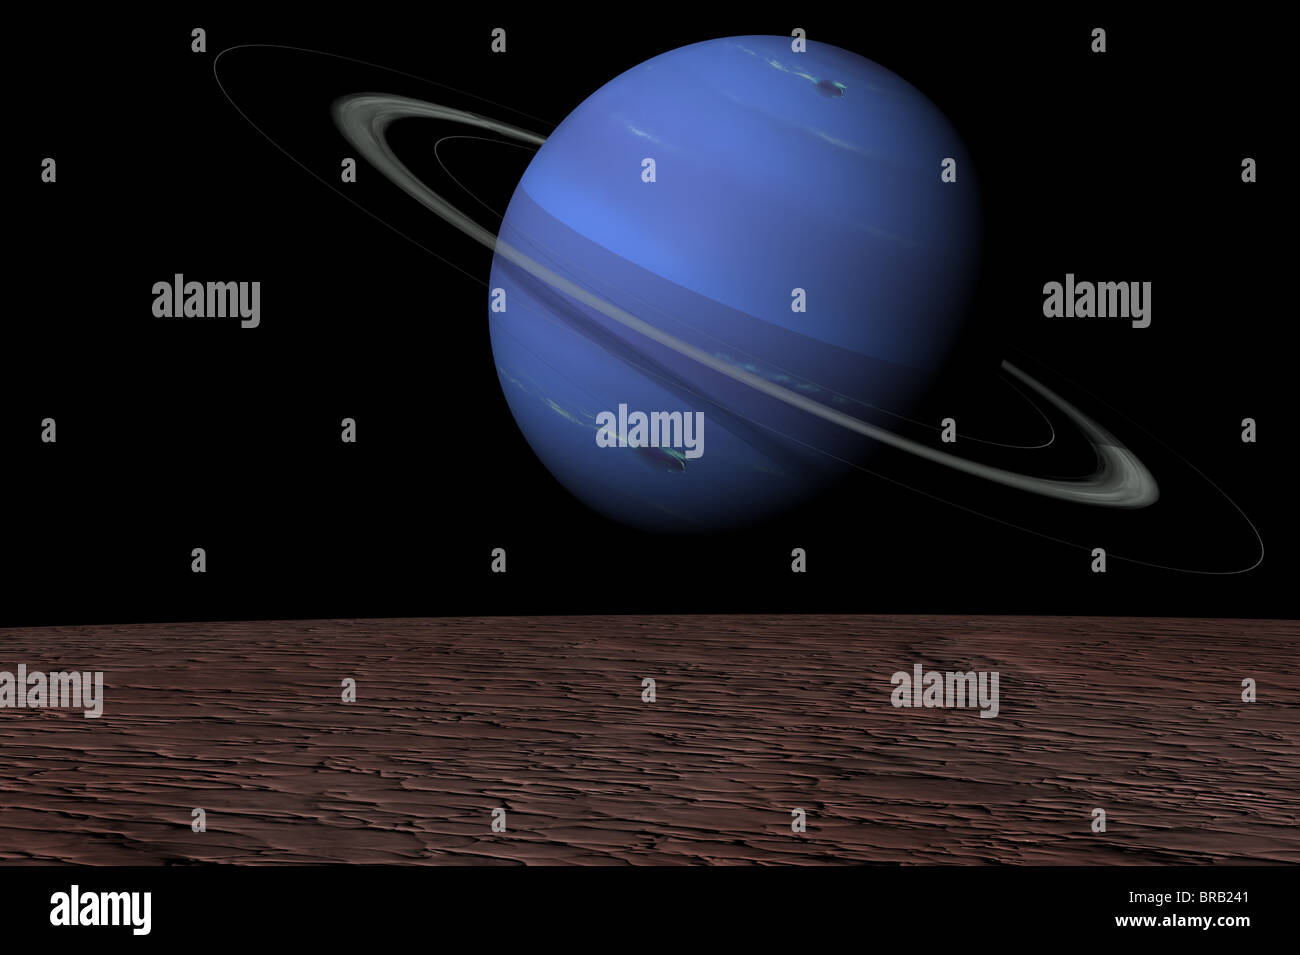 The Planets in Order of Distance, Size, Mass & More - StarLust